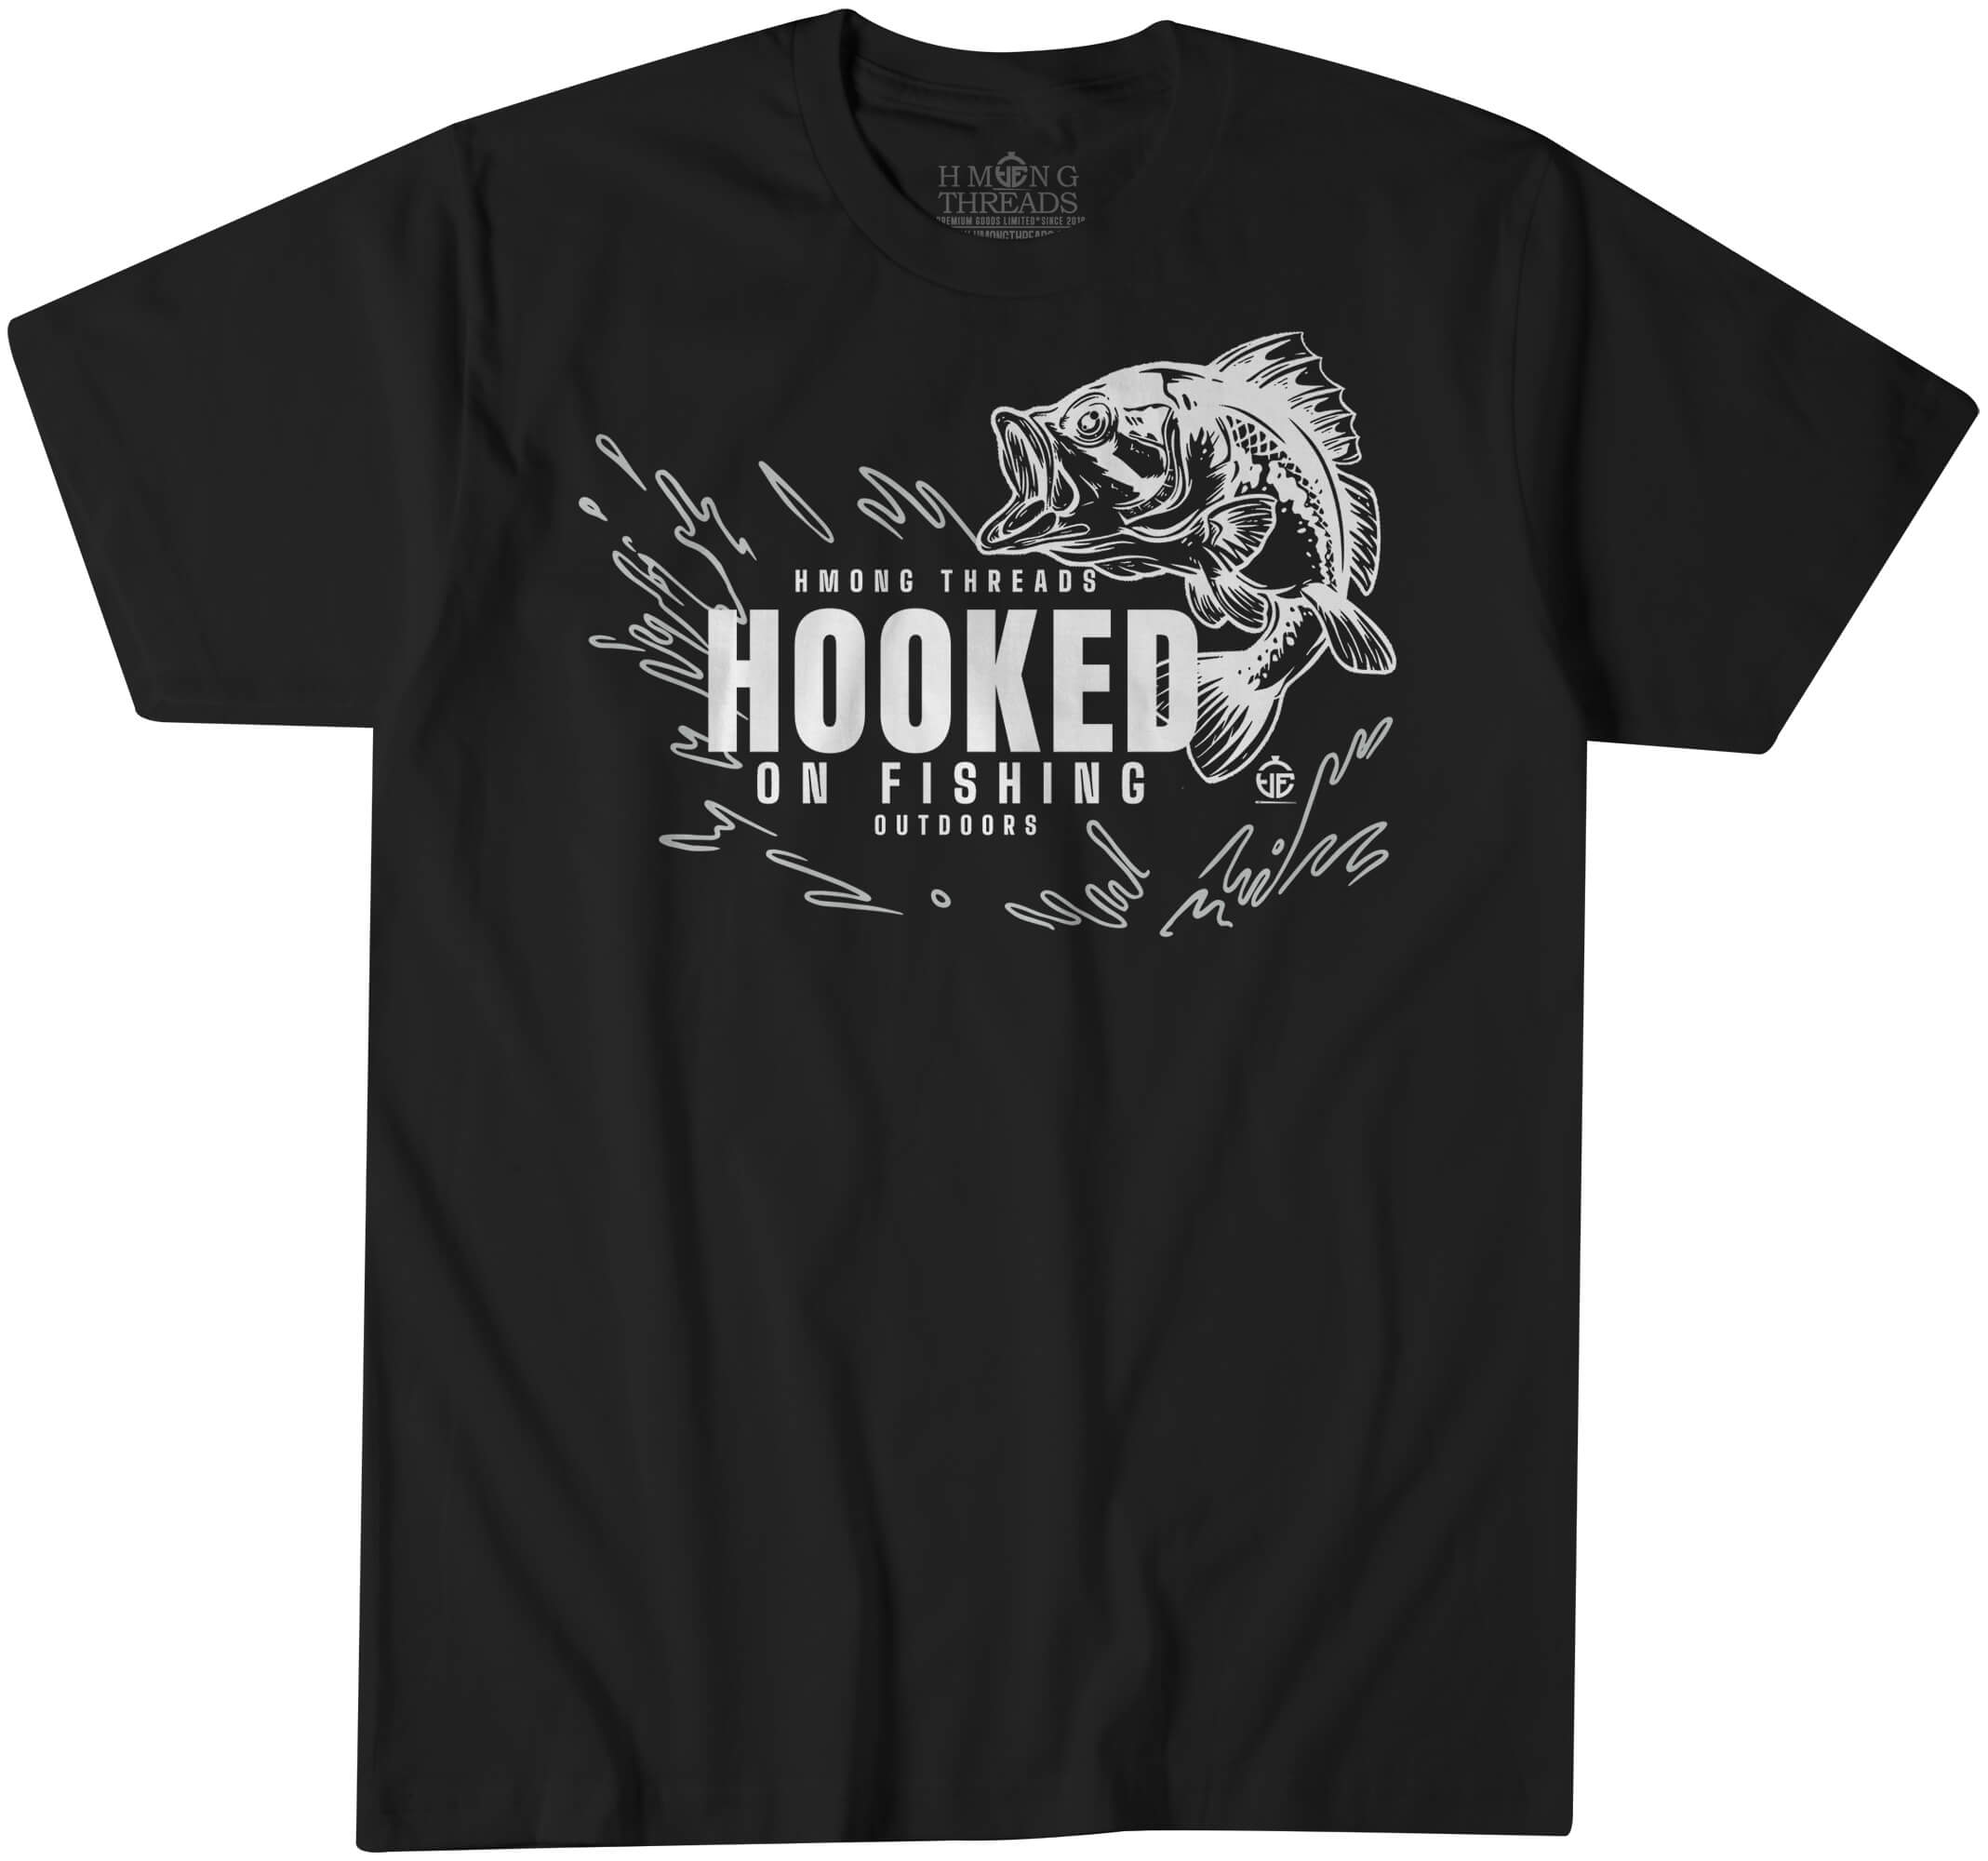 Hooked on Fishing Outdoors - Black T-Shirt